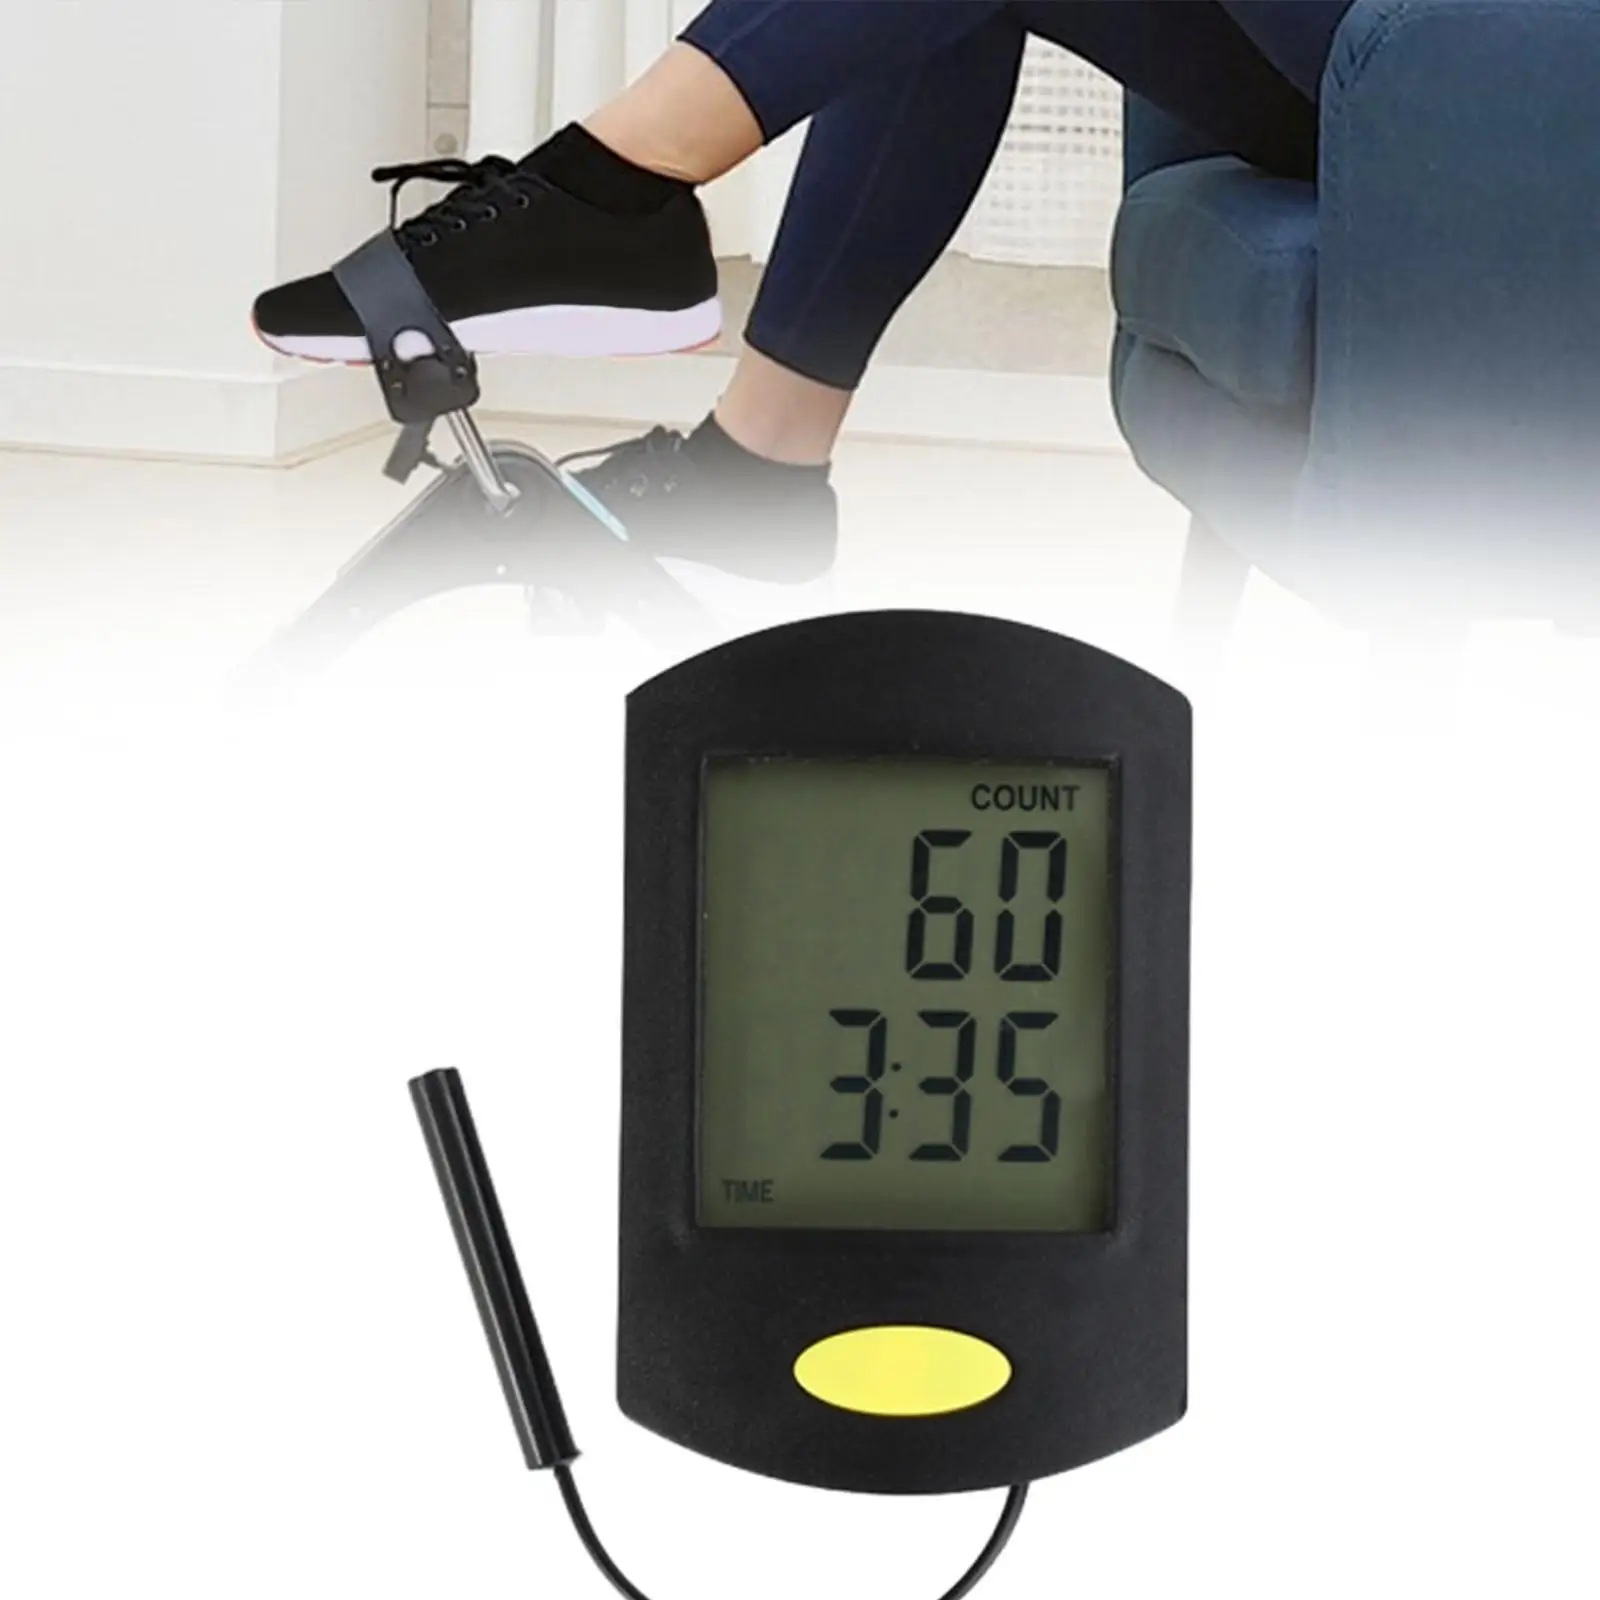 Replacement Monitor Speedometer, Exercise Bike Computer Pedometer, Adult